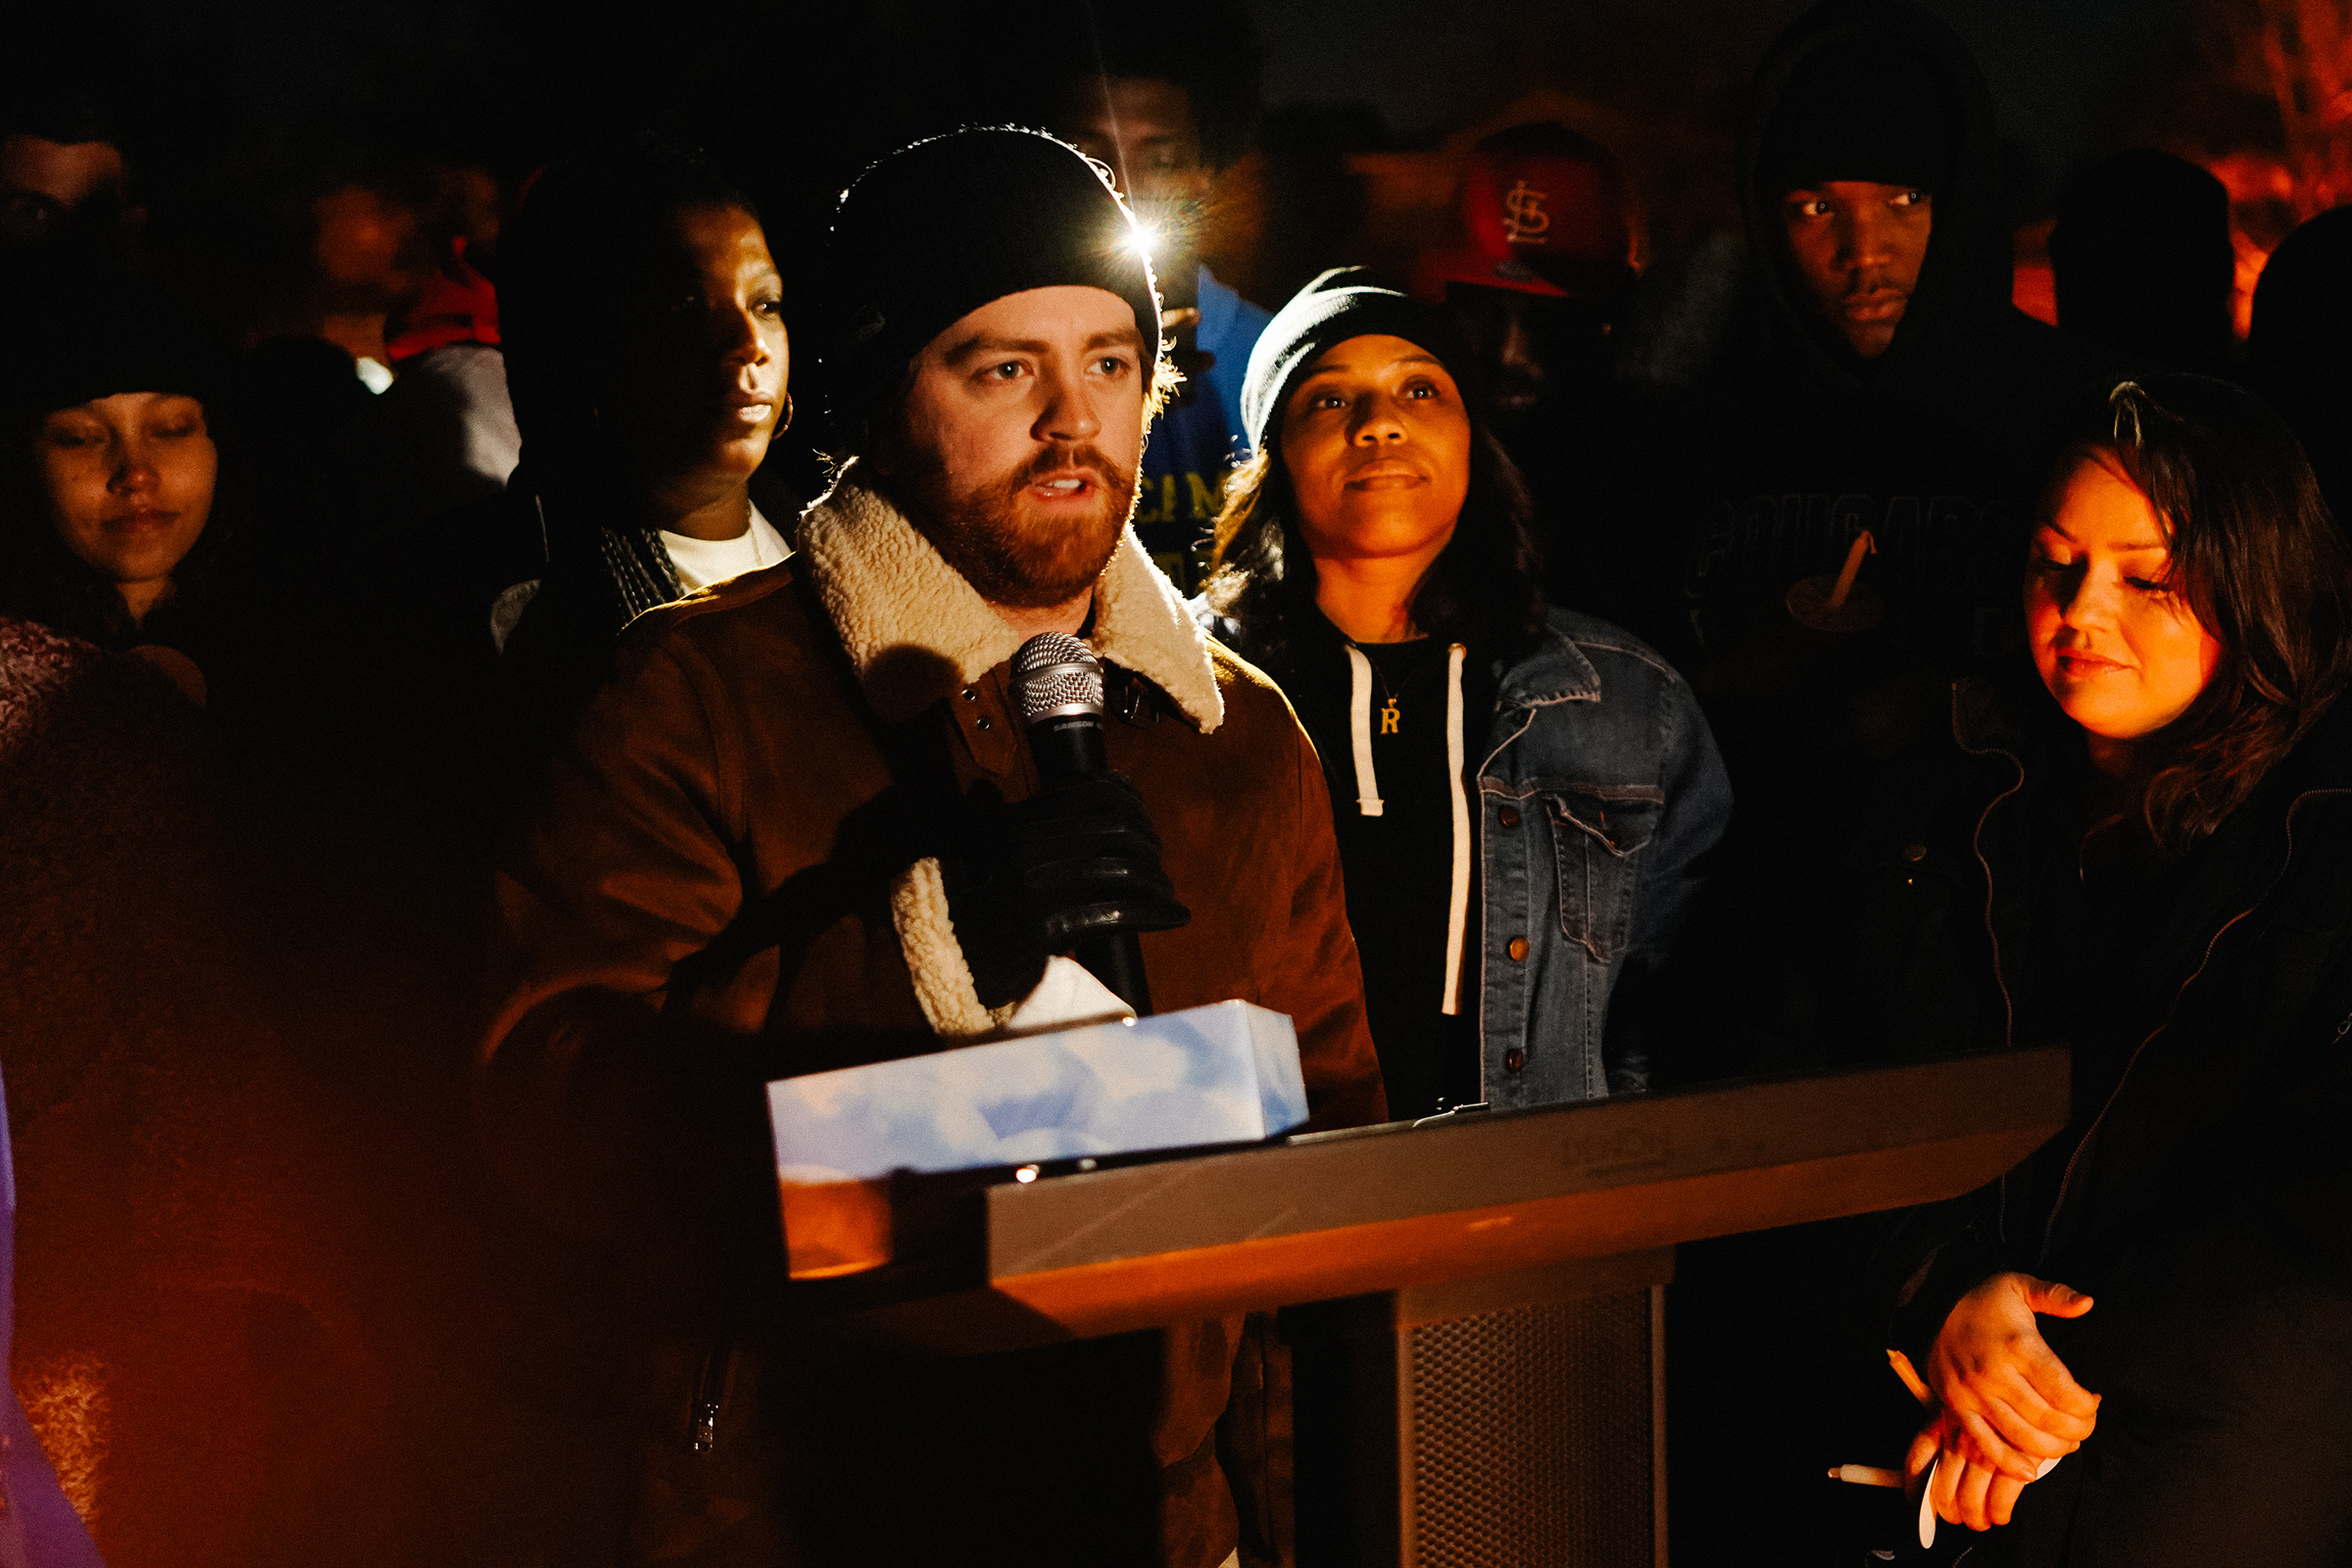 Ryan Wilson, a friend of Nichols, speaks during the vigil in Sacramento. (Mark Dillon for TIME)